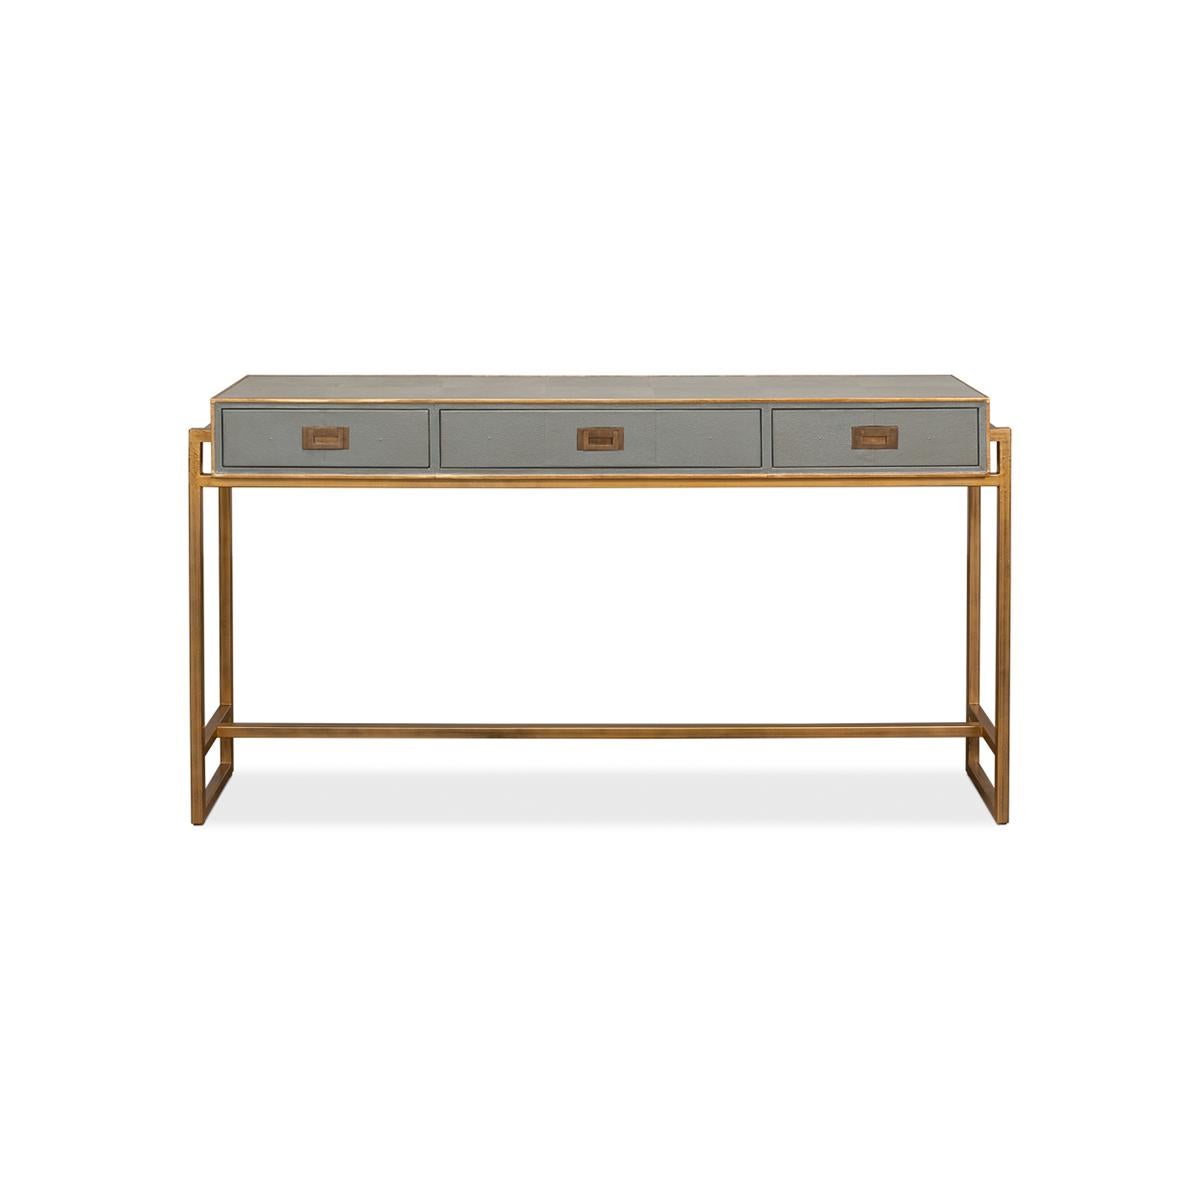 Our Modern Campaign Grey Leather Wrapped Console Table is the perfect fusion of vintage and contemporary design. The storm grey embossed leather wrapping is not only sleek, but it is also the perfect backdrop for the elegant gilded trim and brass